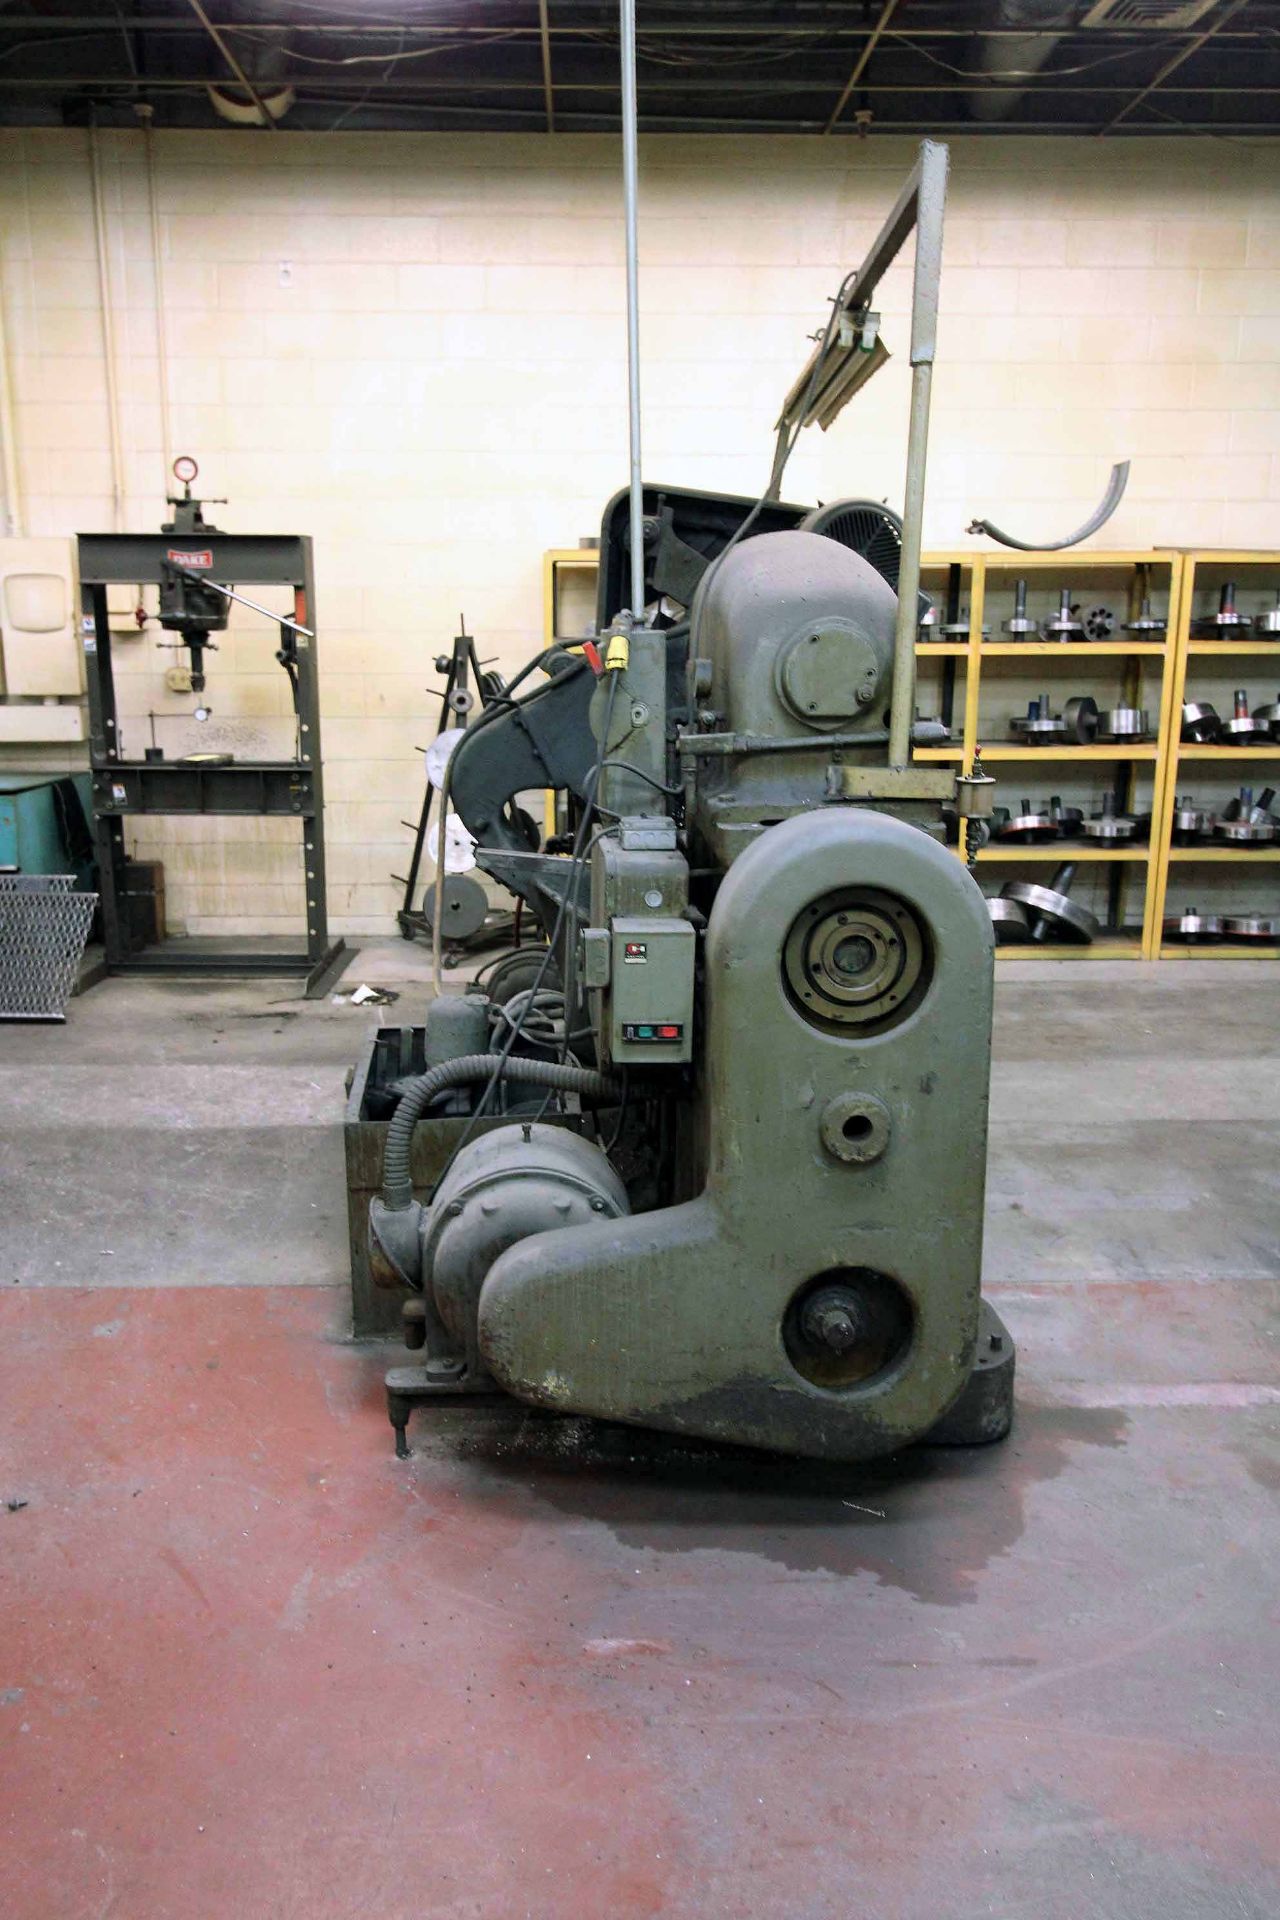 INTERNAL GRINDER, BRYANT NO. 24-26, 15 HP grinding spdl. drive, 18” dia. 6-jaw chuck, auto. - Image 5 of 7